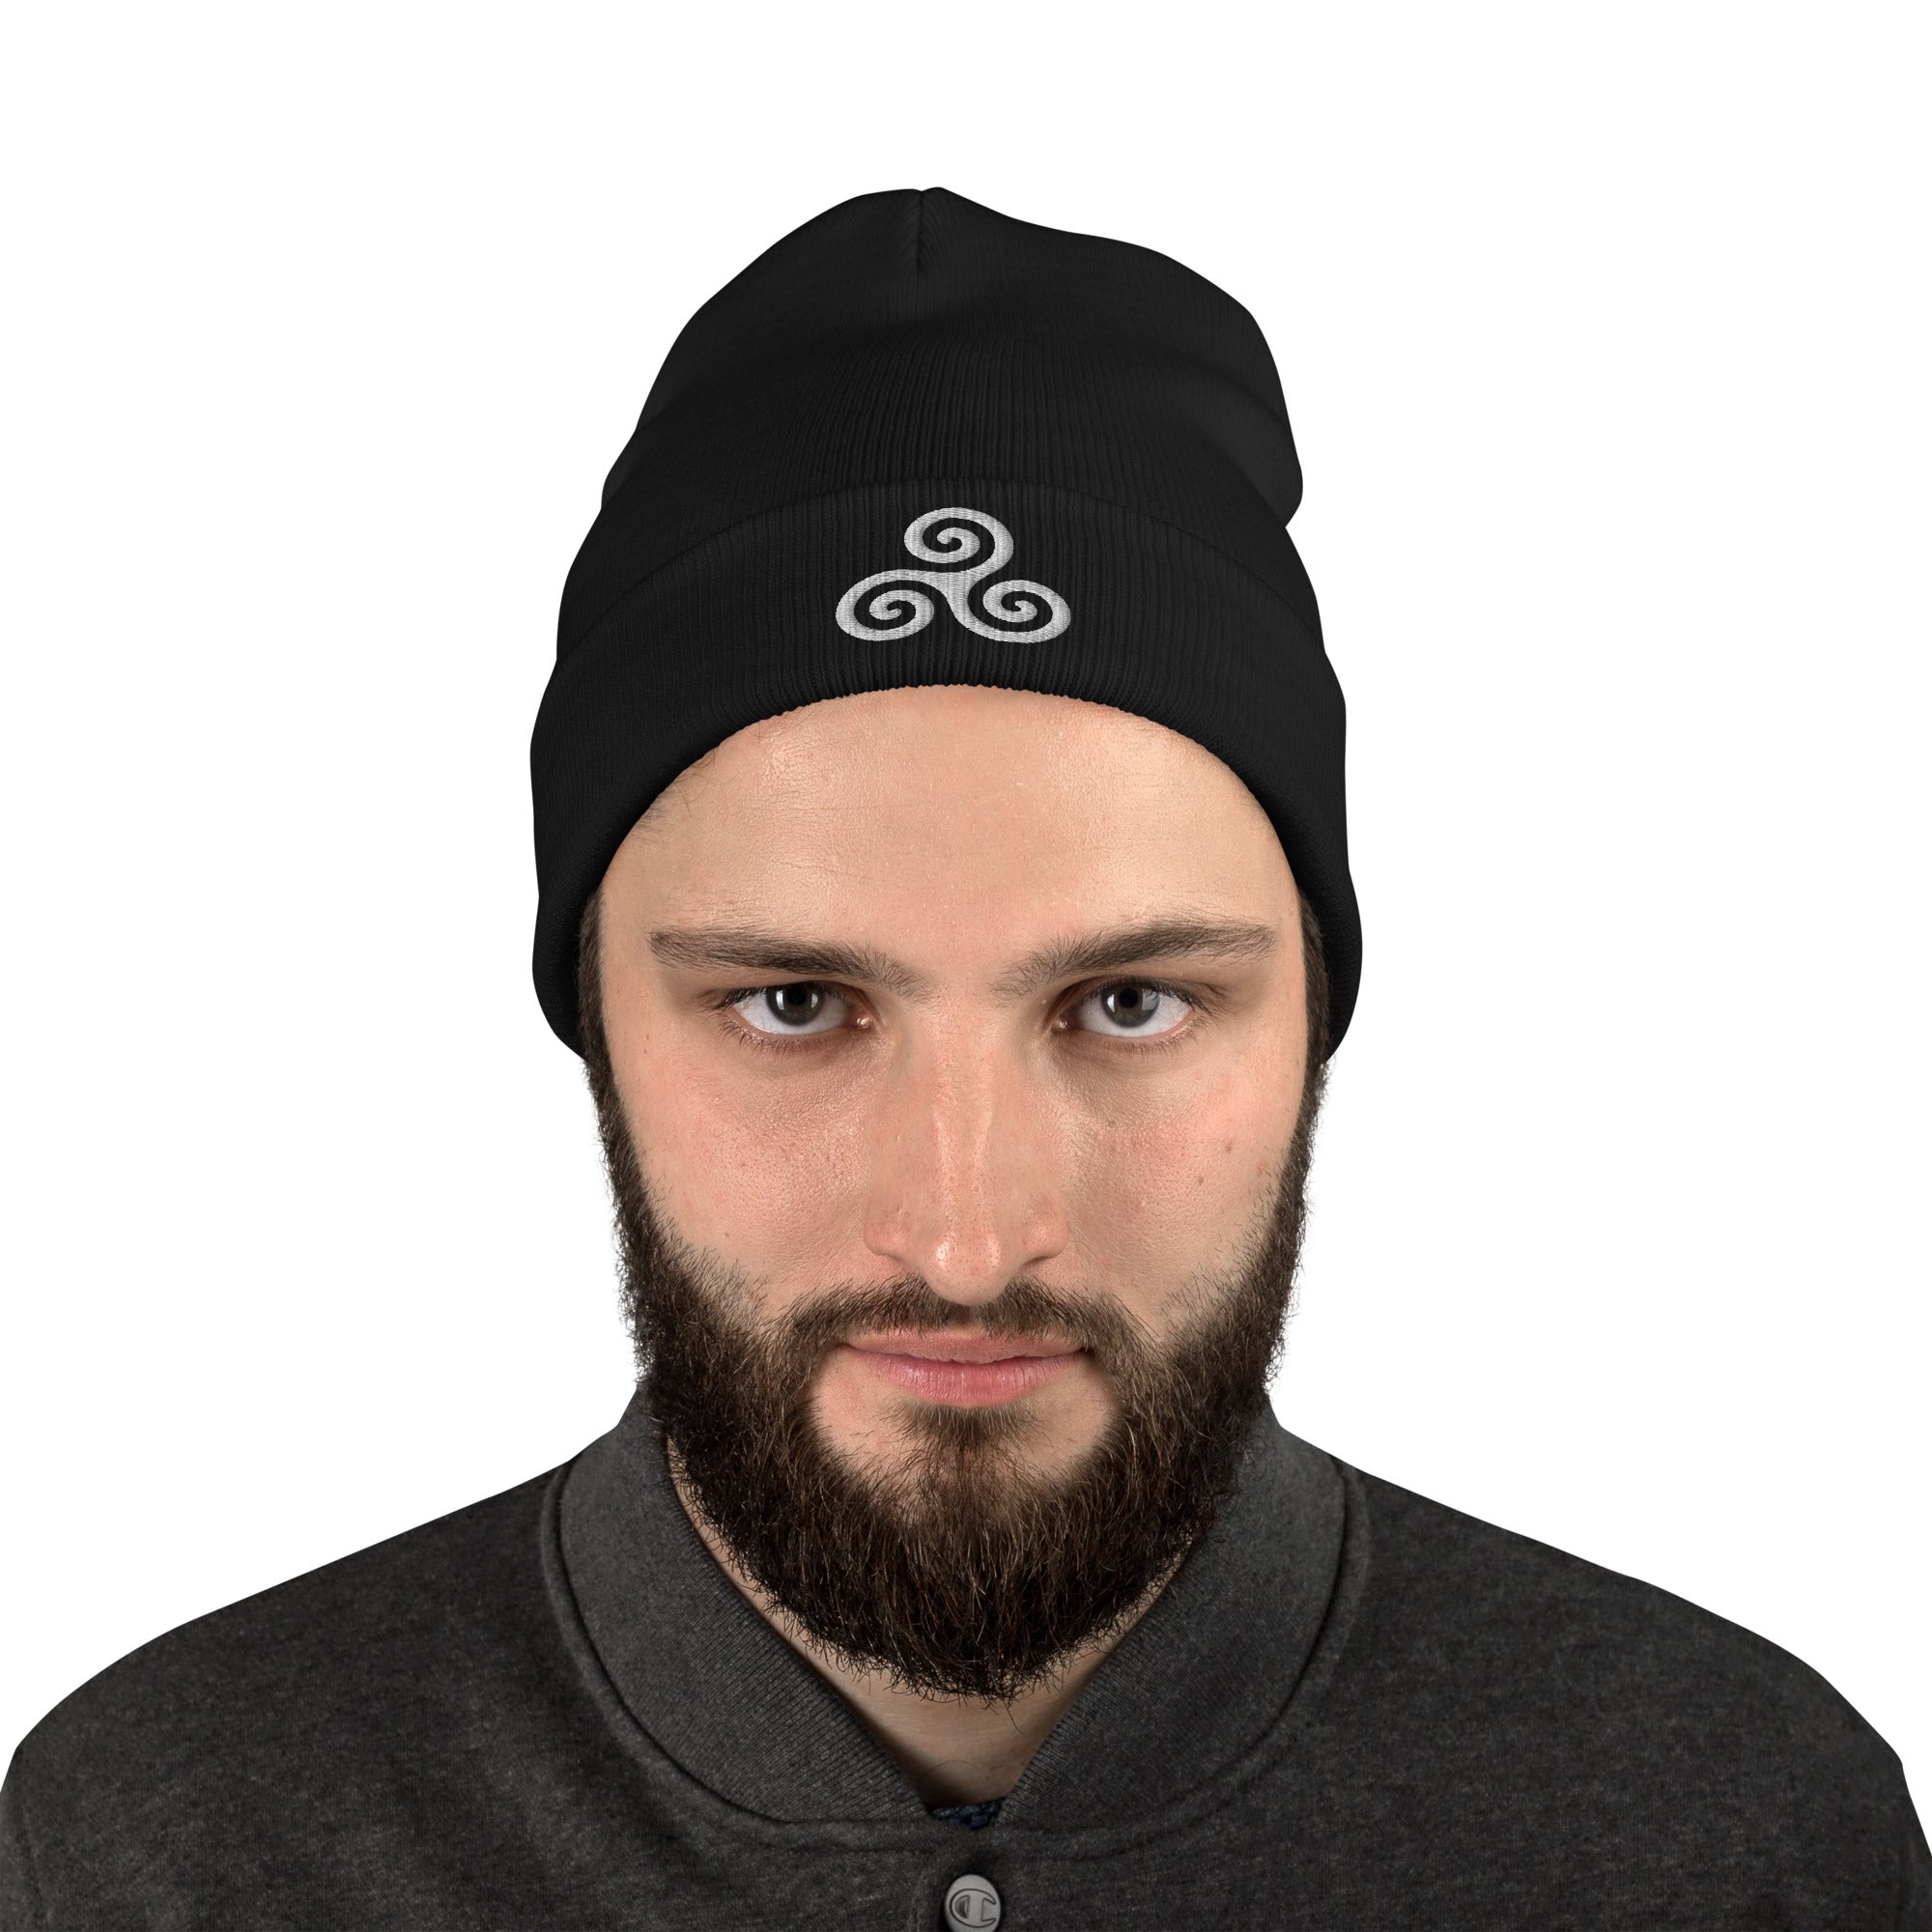 Triskelion or Triskeles Spiral Embroidered Cuff Beanie Archimedean - Edge of Life Designs